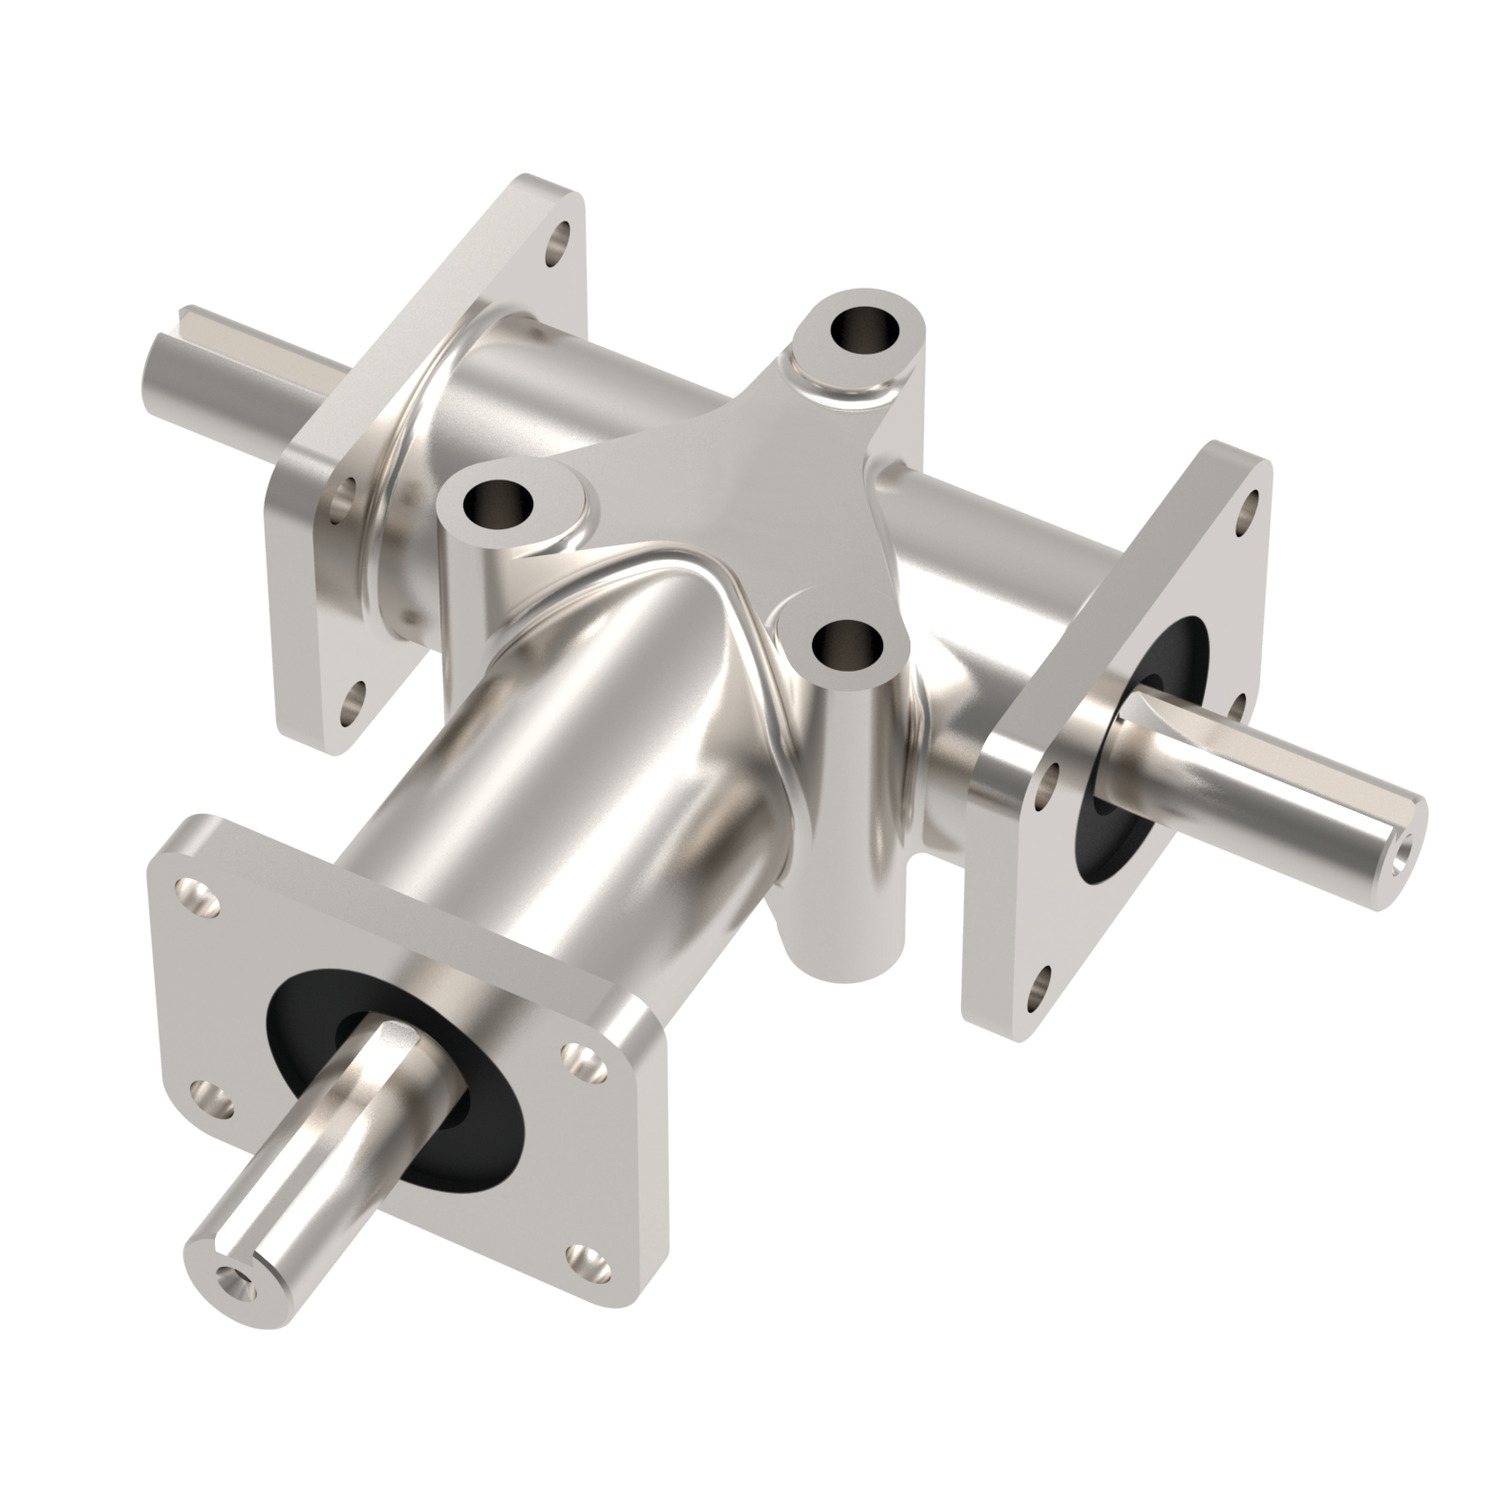 R2353 Stainless Right Angle Drives - 3 Shafts